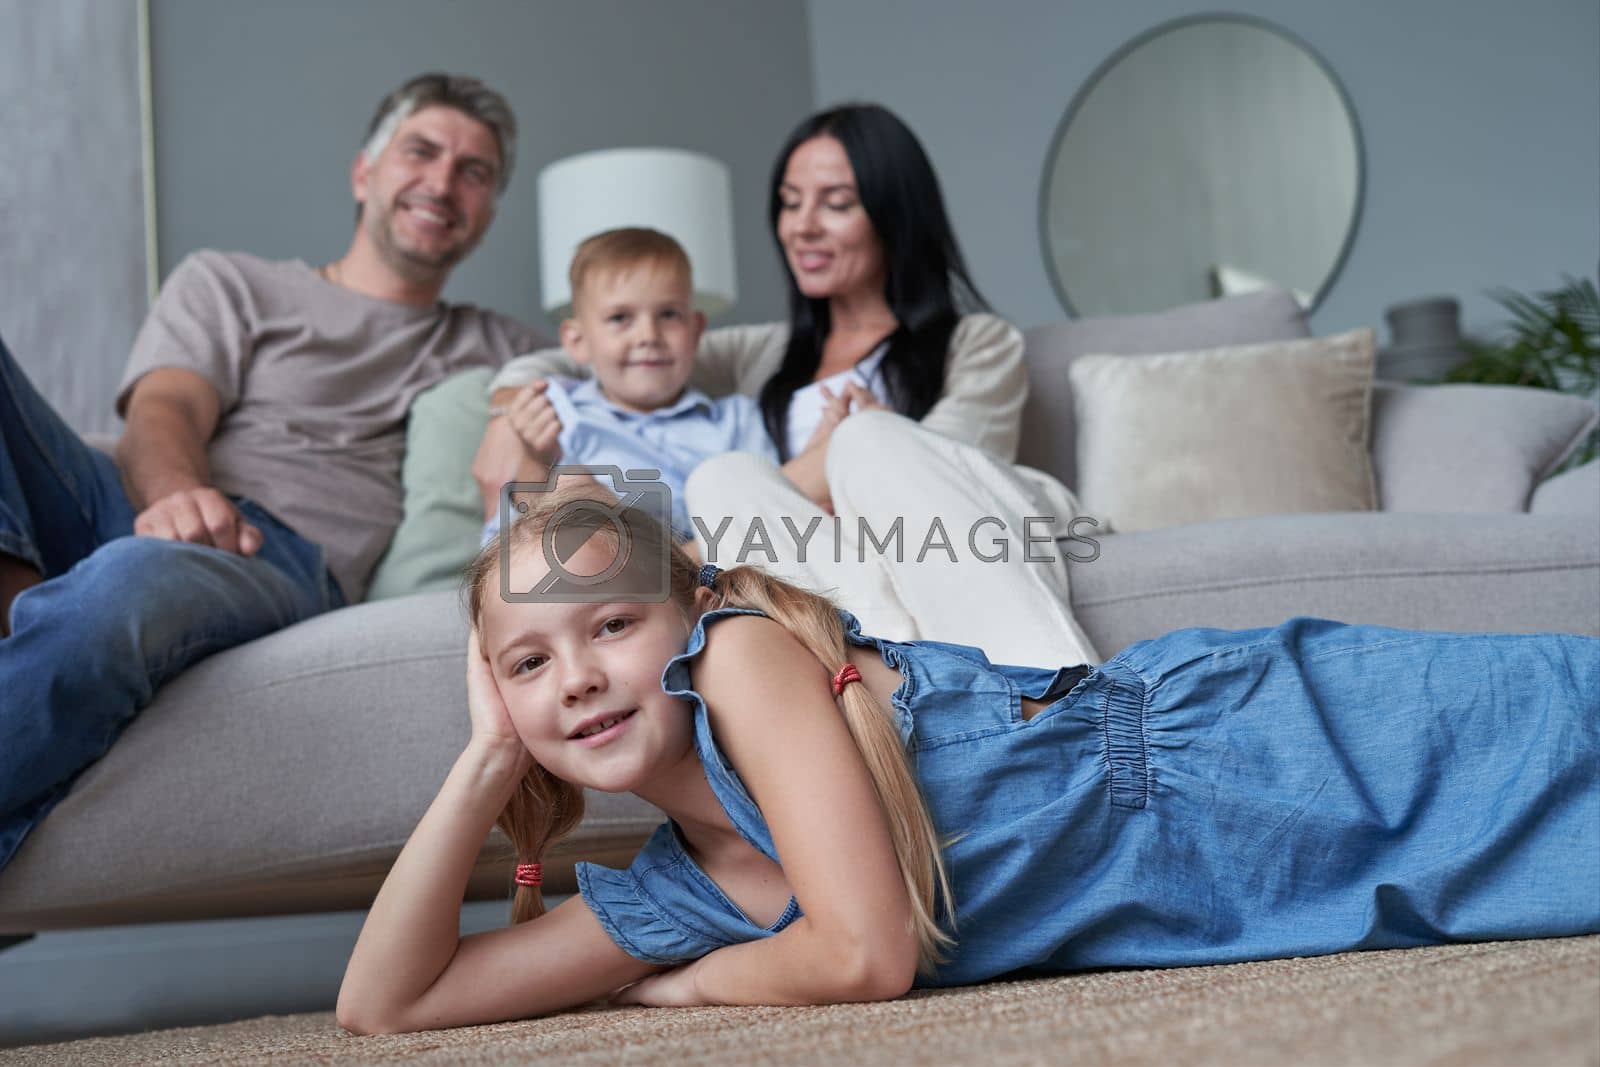 Royalty free image of happy family mother father and children at home by asdf